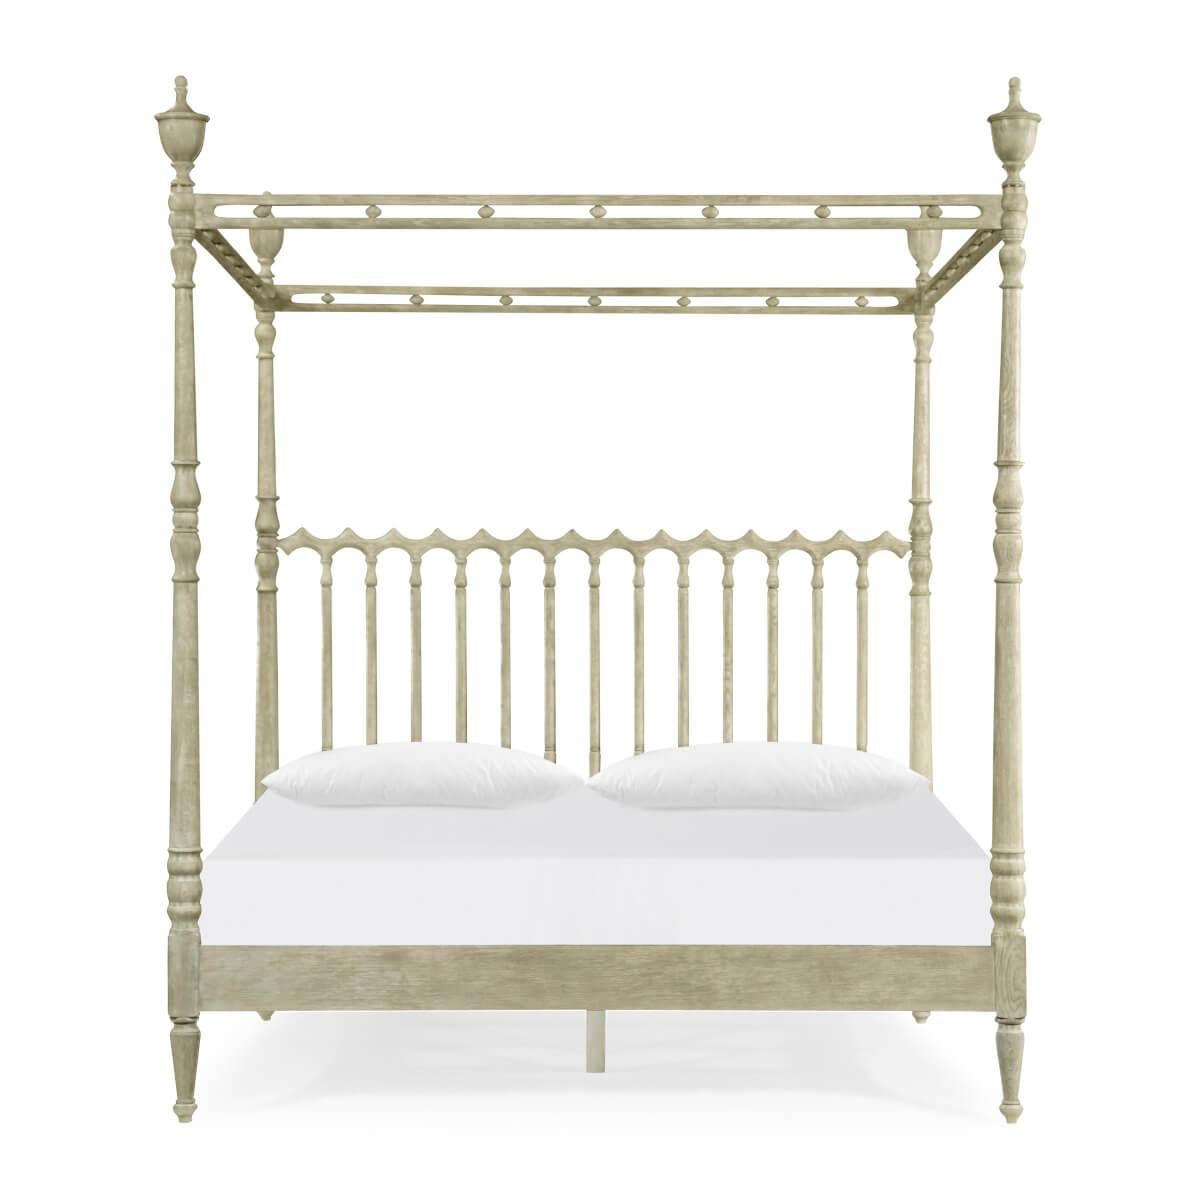 English greyed oak four-poster bed with an elegantly carved canopy, with gothic motifs, urn finials and turned and carved posts.

Dimensions: 67.33